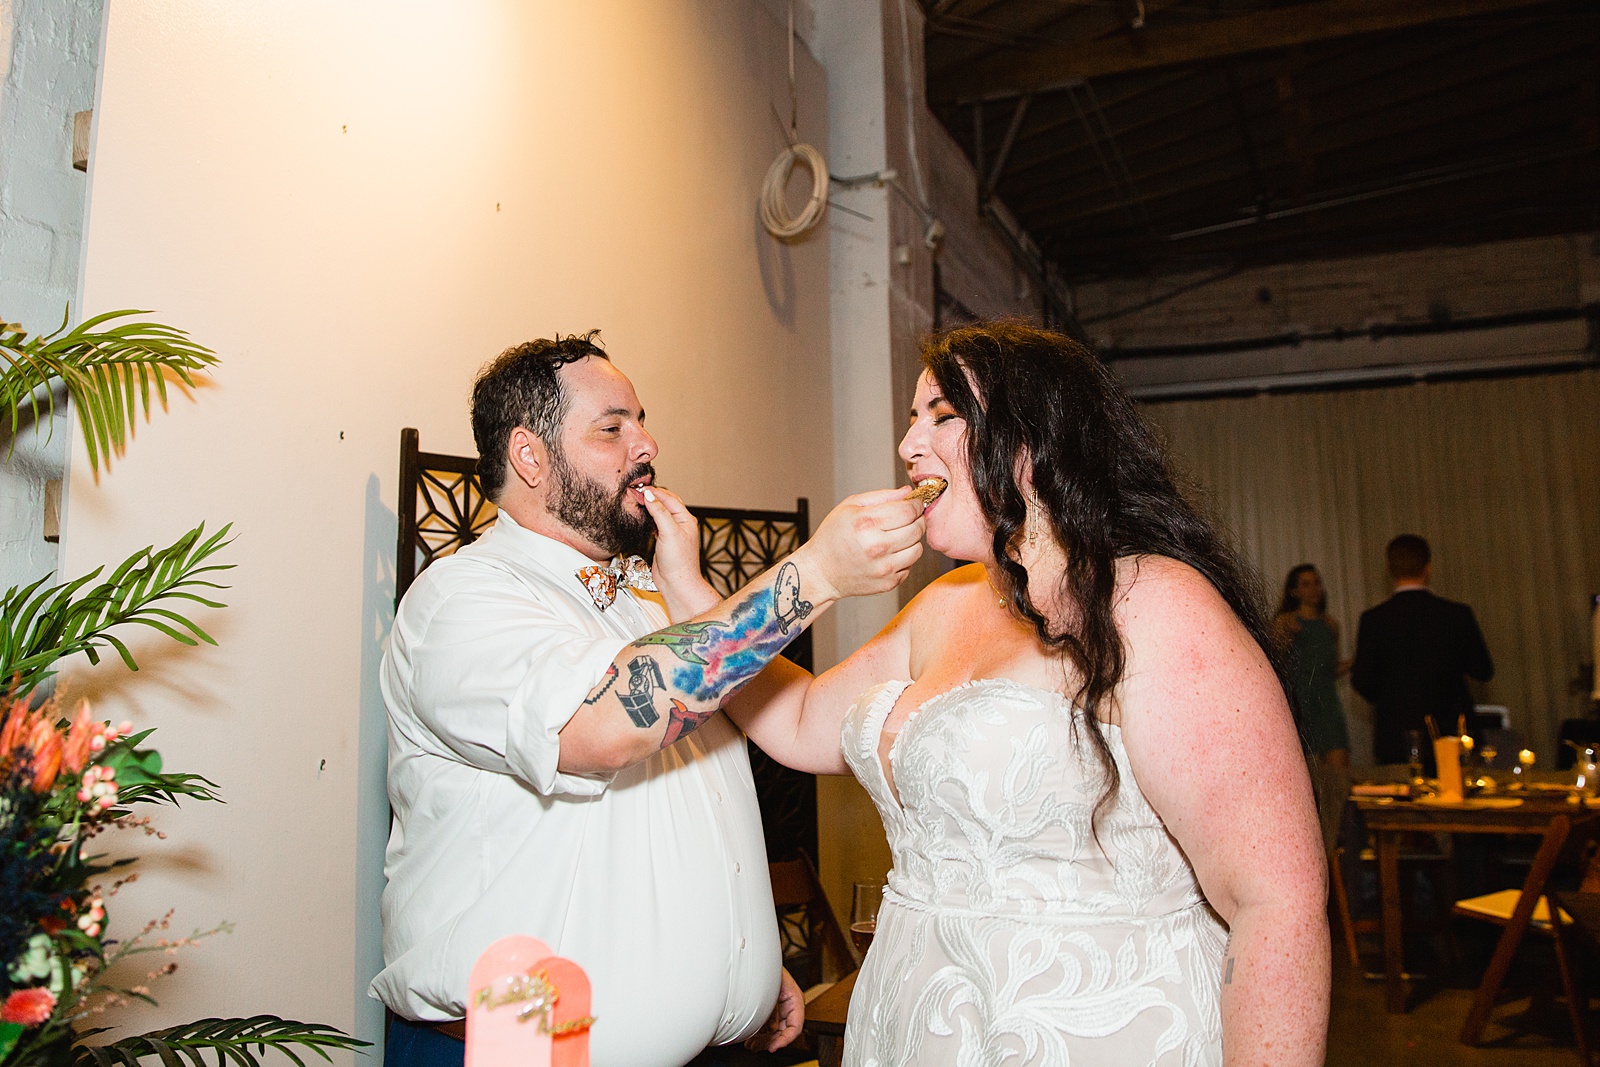 Bride and Groom cutting their wedding cake at their MonOrchid wedding reception by Arizona wedding photographer PMA Photography.